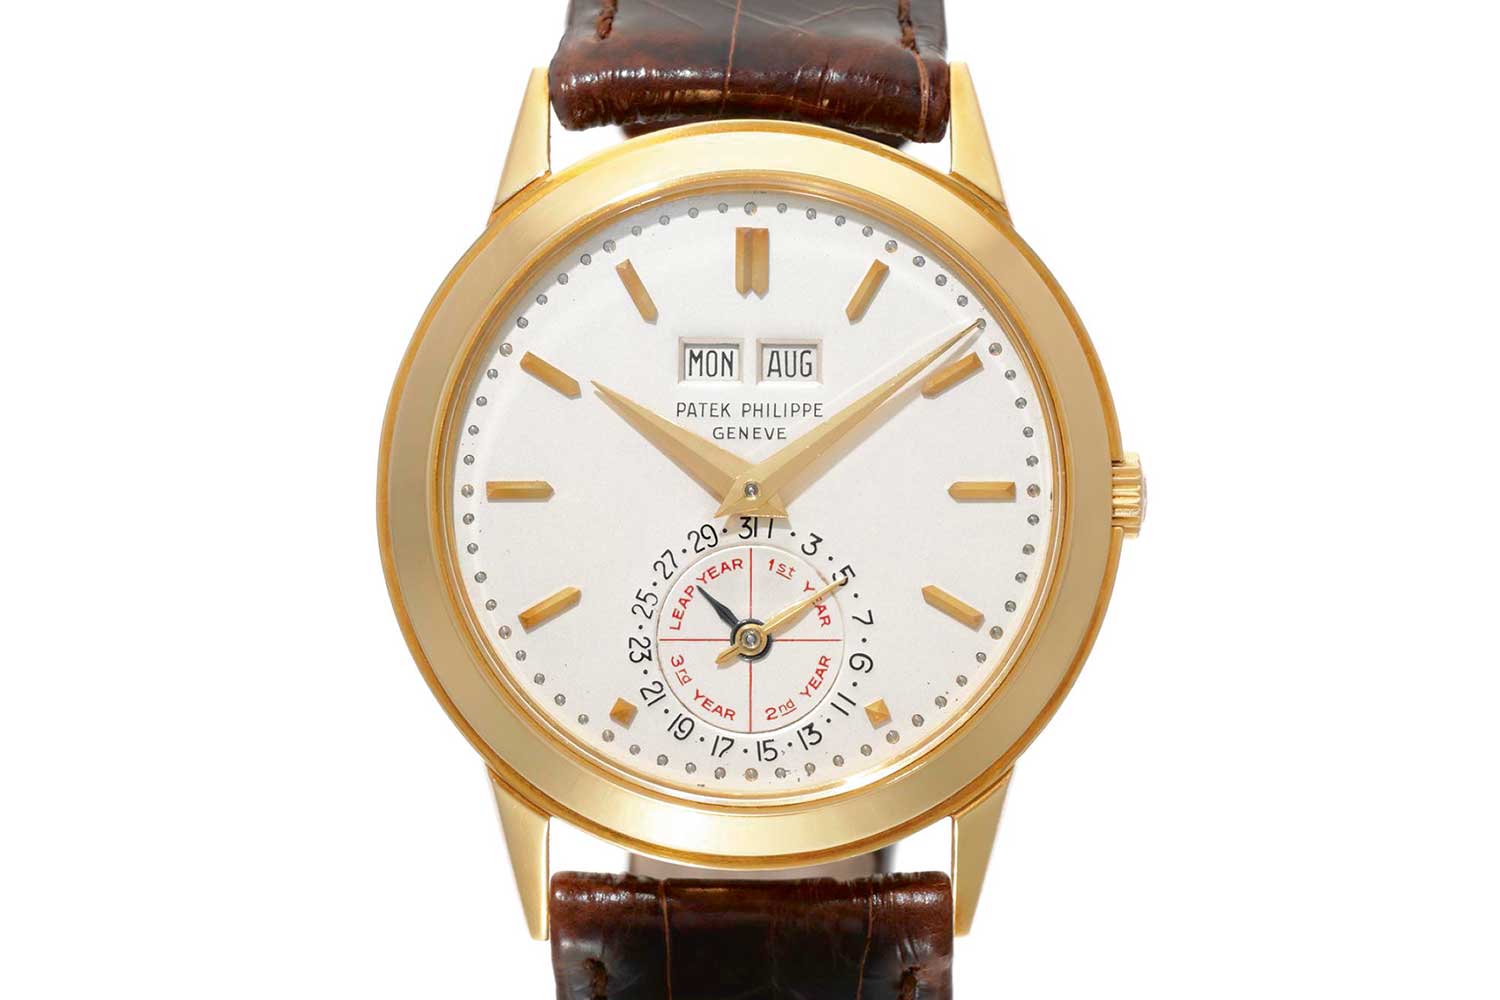 A unique Patek Philippe ref. 3448, with a leap year display instead of a moon phase shown on the subdial, circa 1975